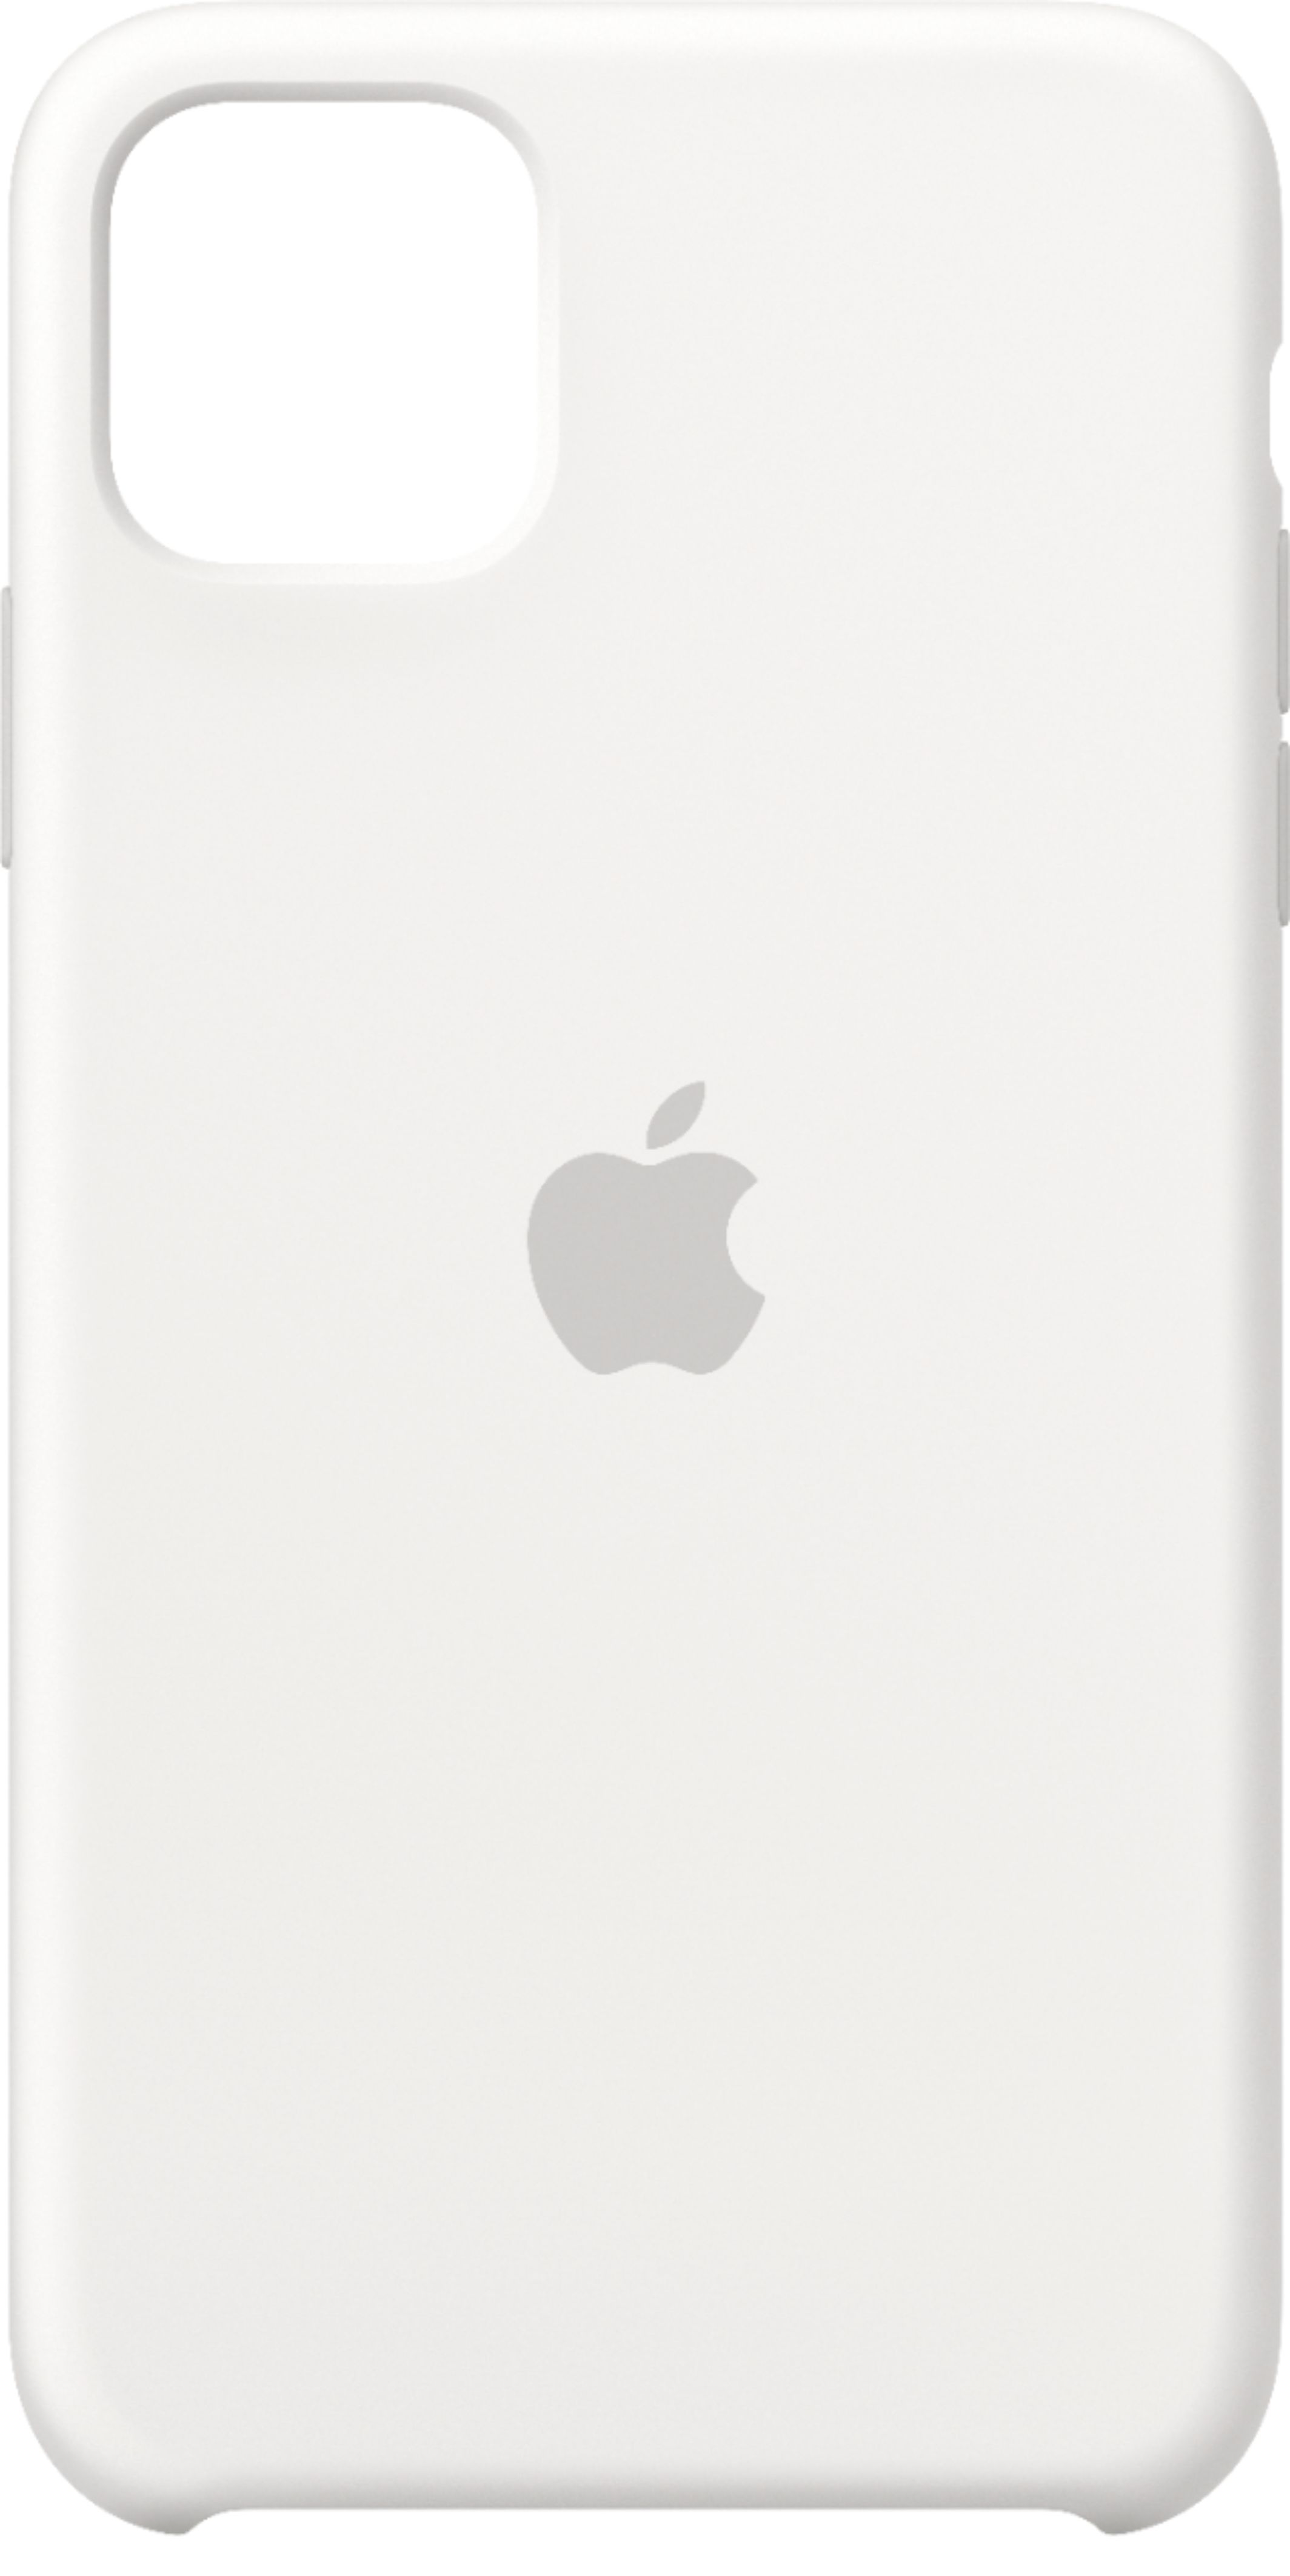 Apple Iphone 11 Pro Max Silicone Case White Mwyx2zm A Best Buy